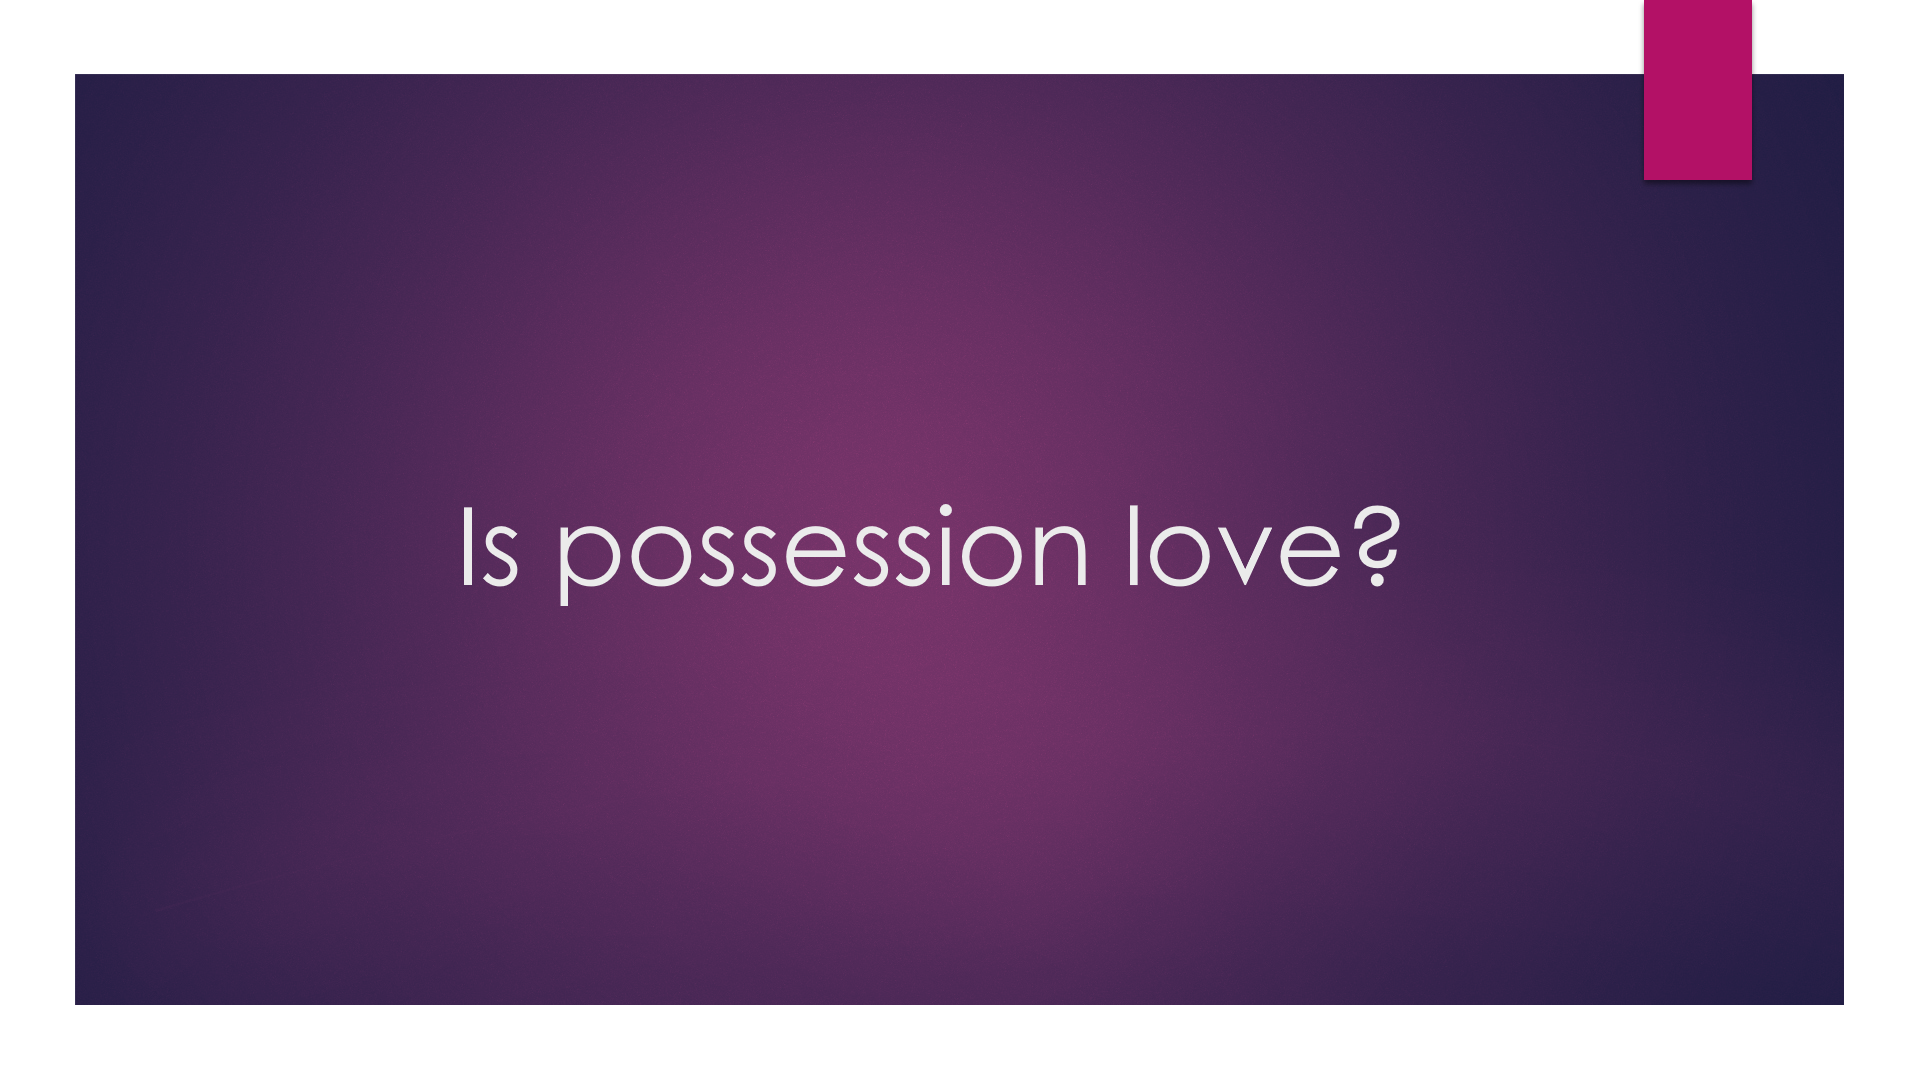 Is possession love?